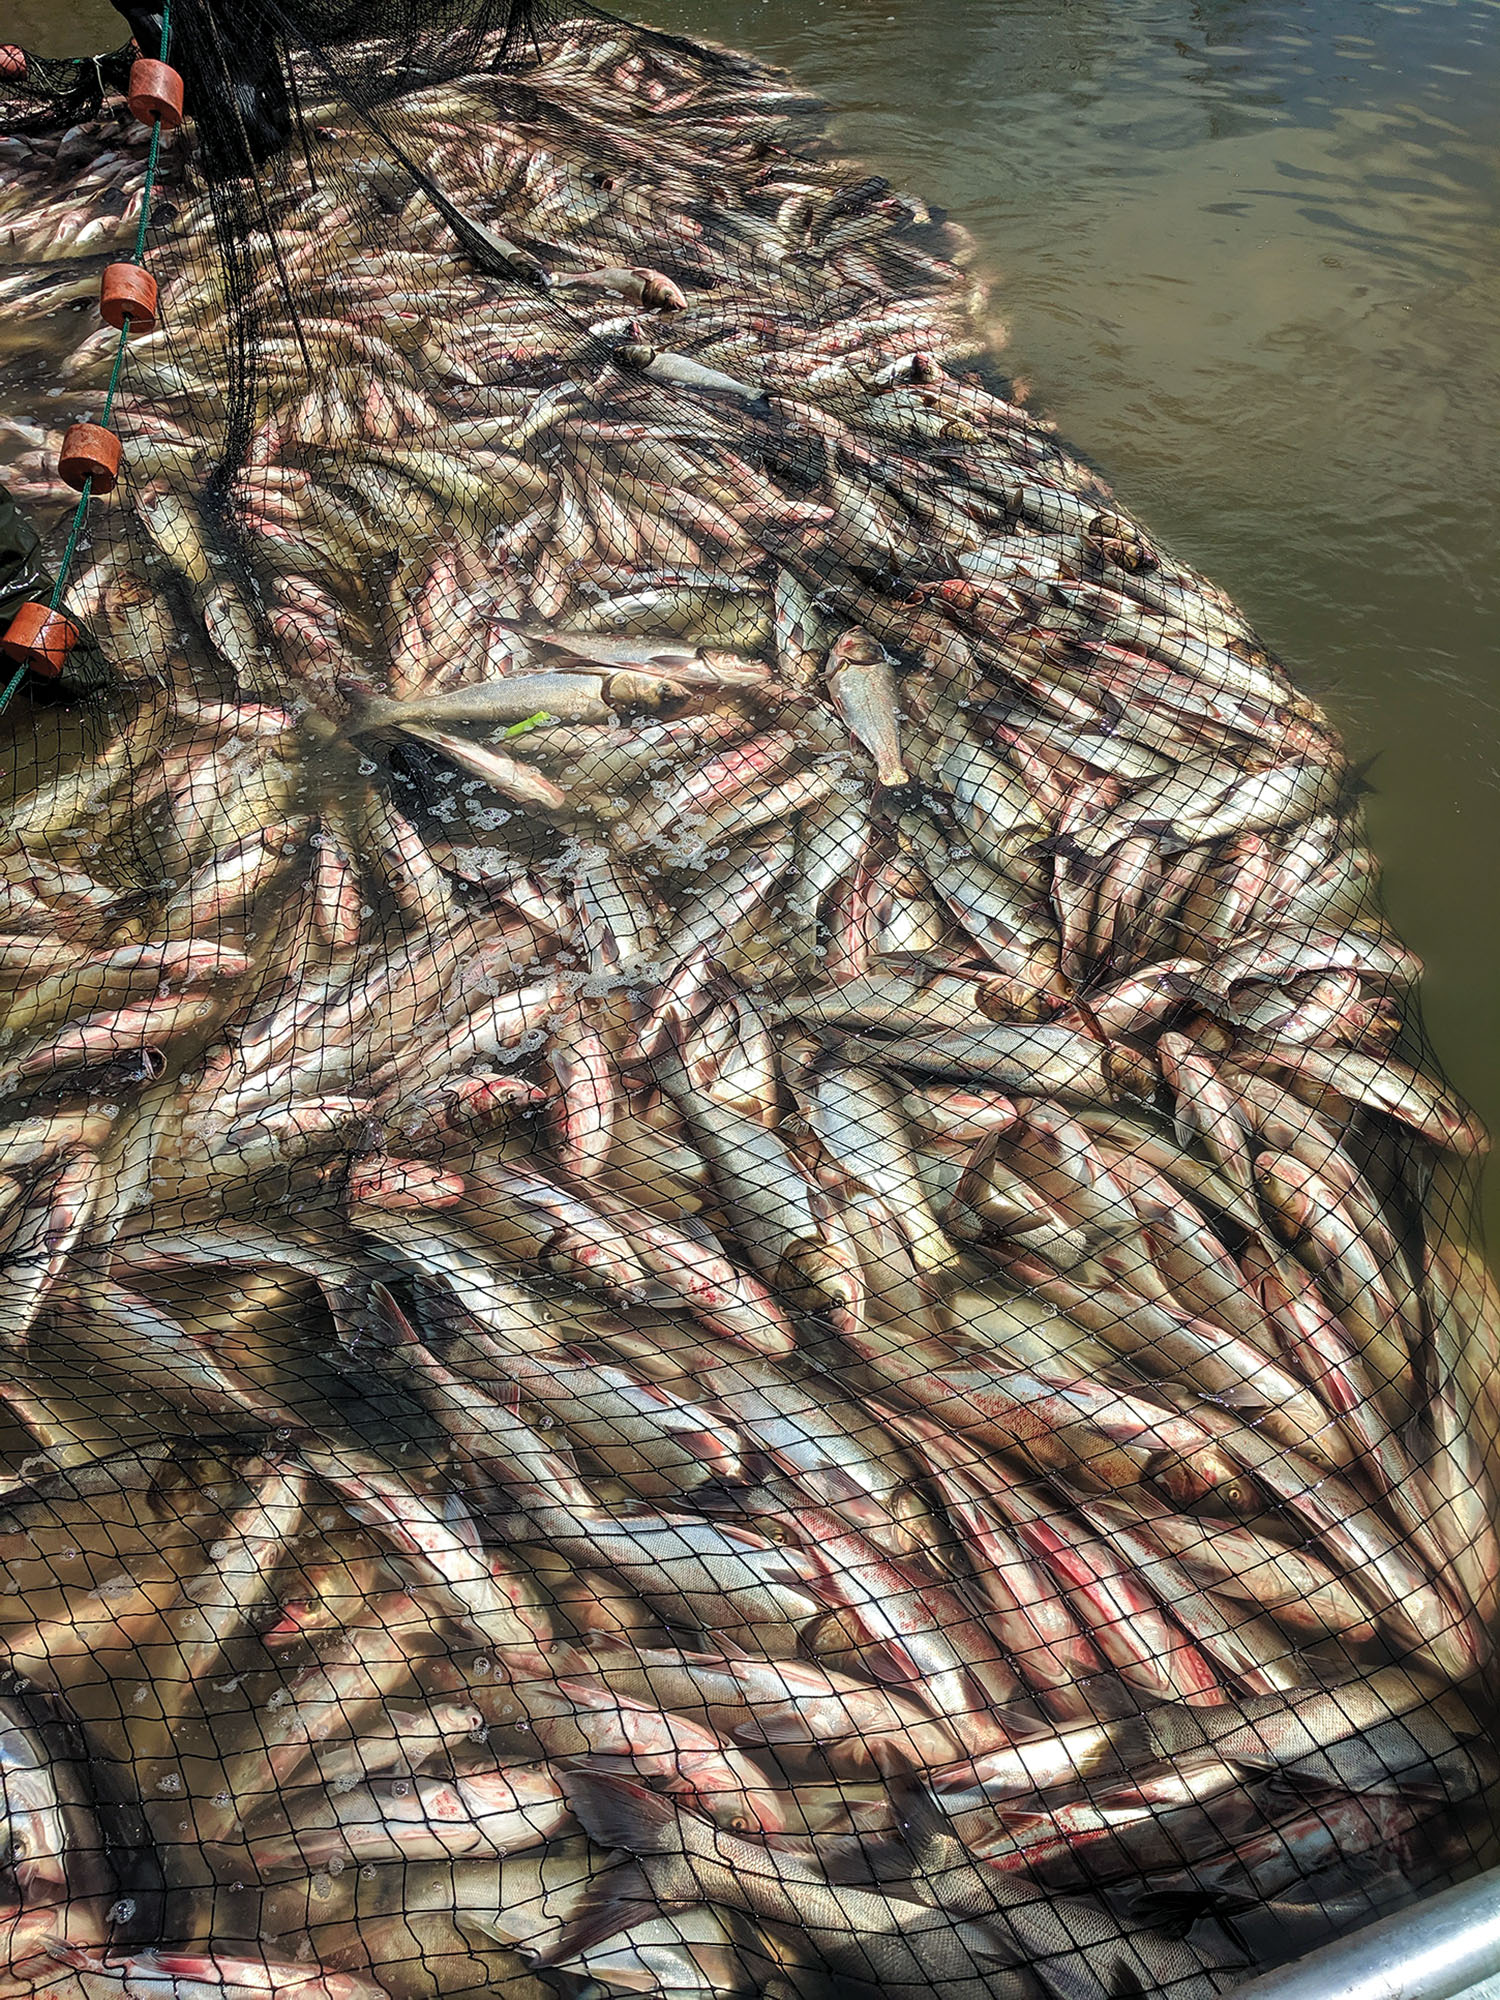 Silver carp, a variety of Asian carp, are hauled in a seine at Kentucky Lake’s Pisgah Bay, part of an experimental test of the haul seining or beach seining method. (Photo courtesy of Robbins Fishery)